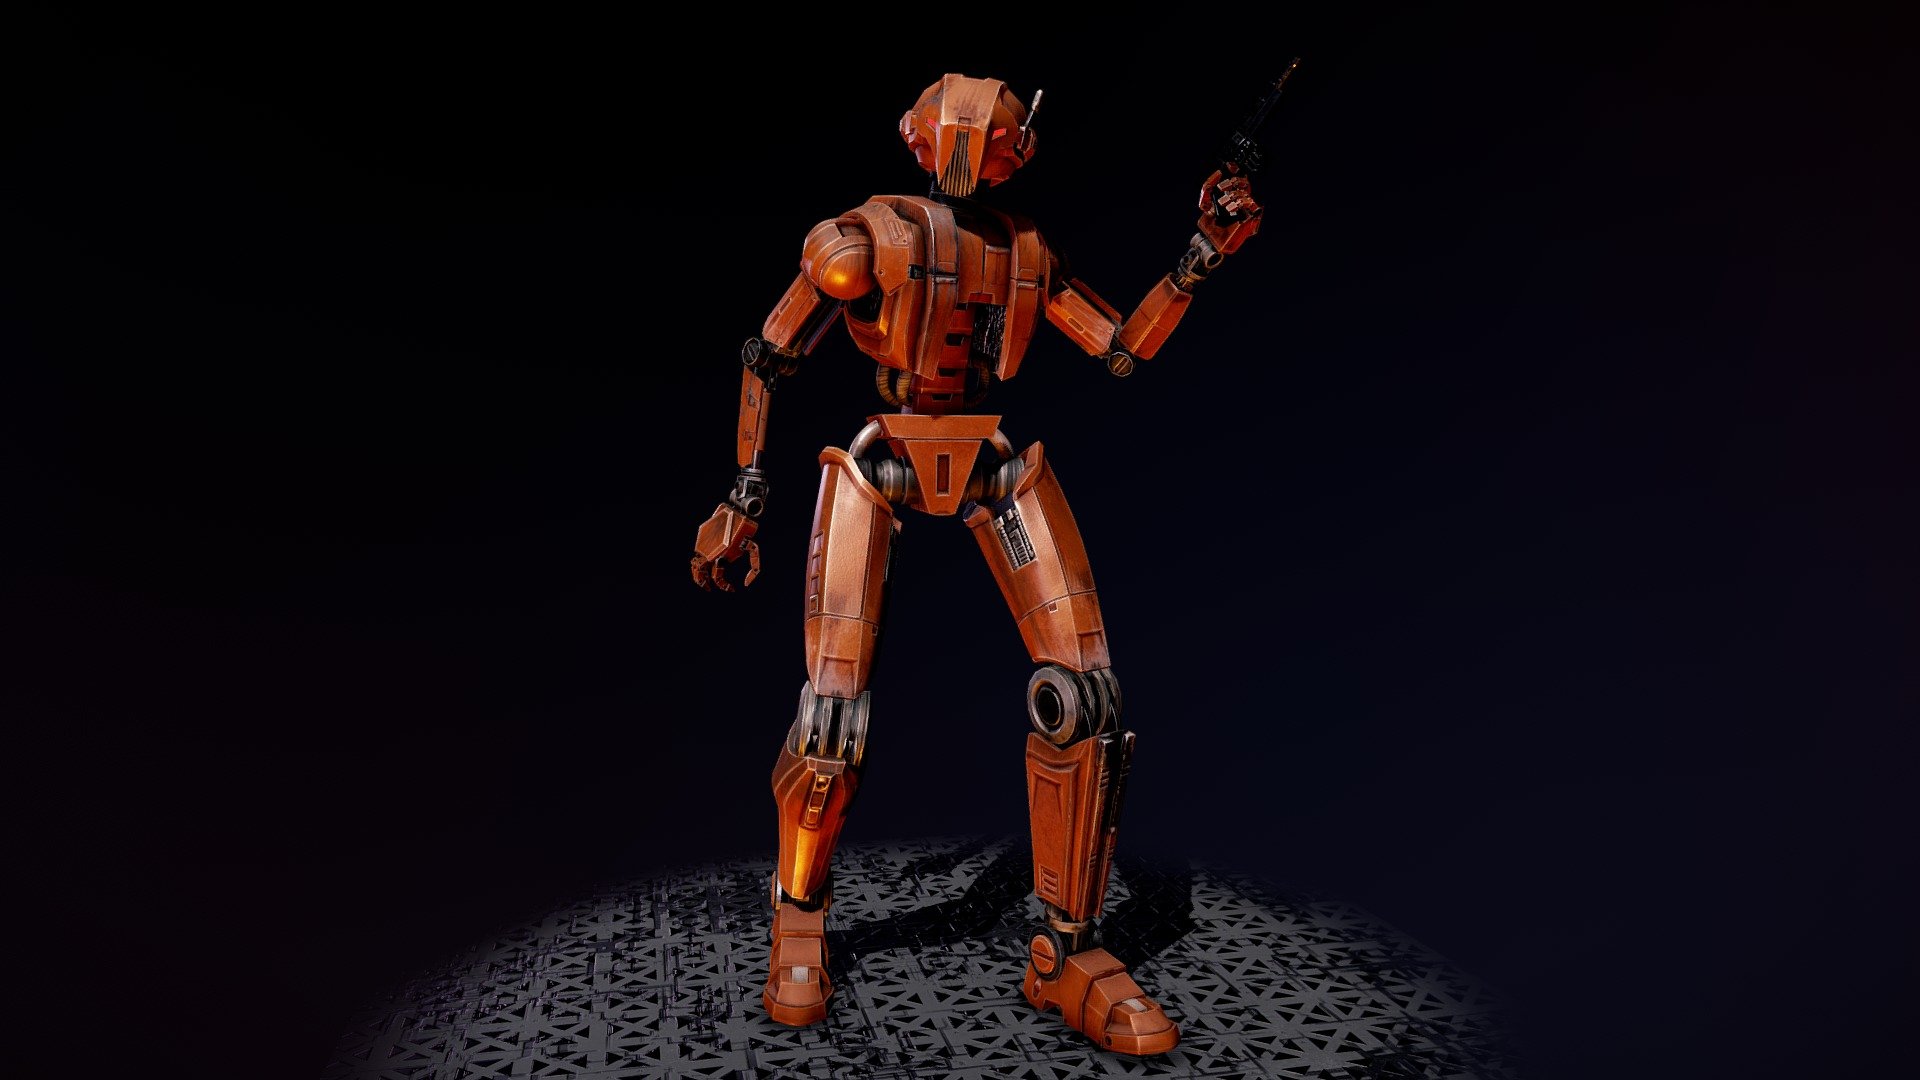 What are you looking at Meatbag?

Check out my info for more  - HK-47 - 3D model by vital-ire 3d model